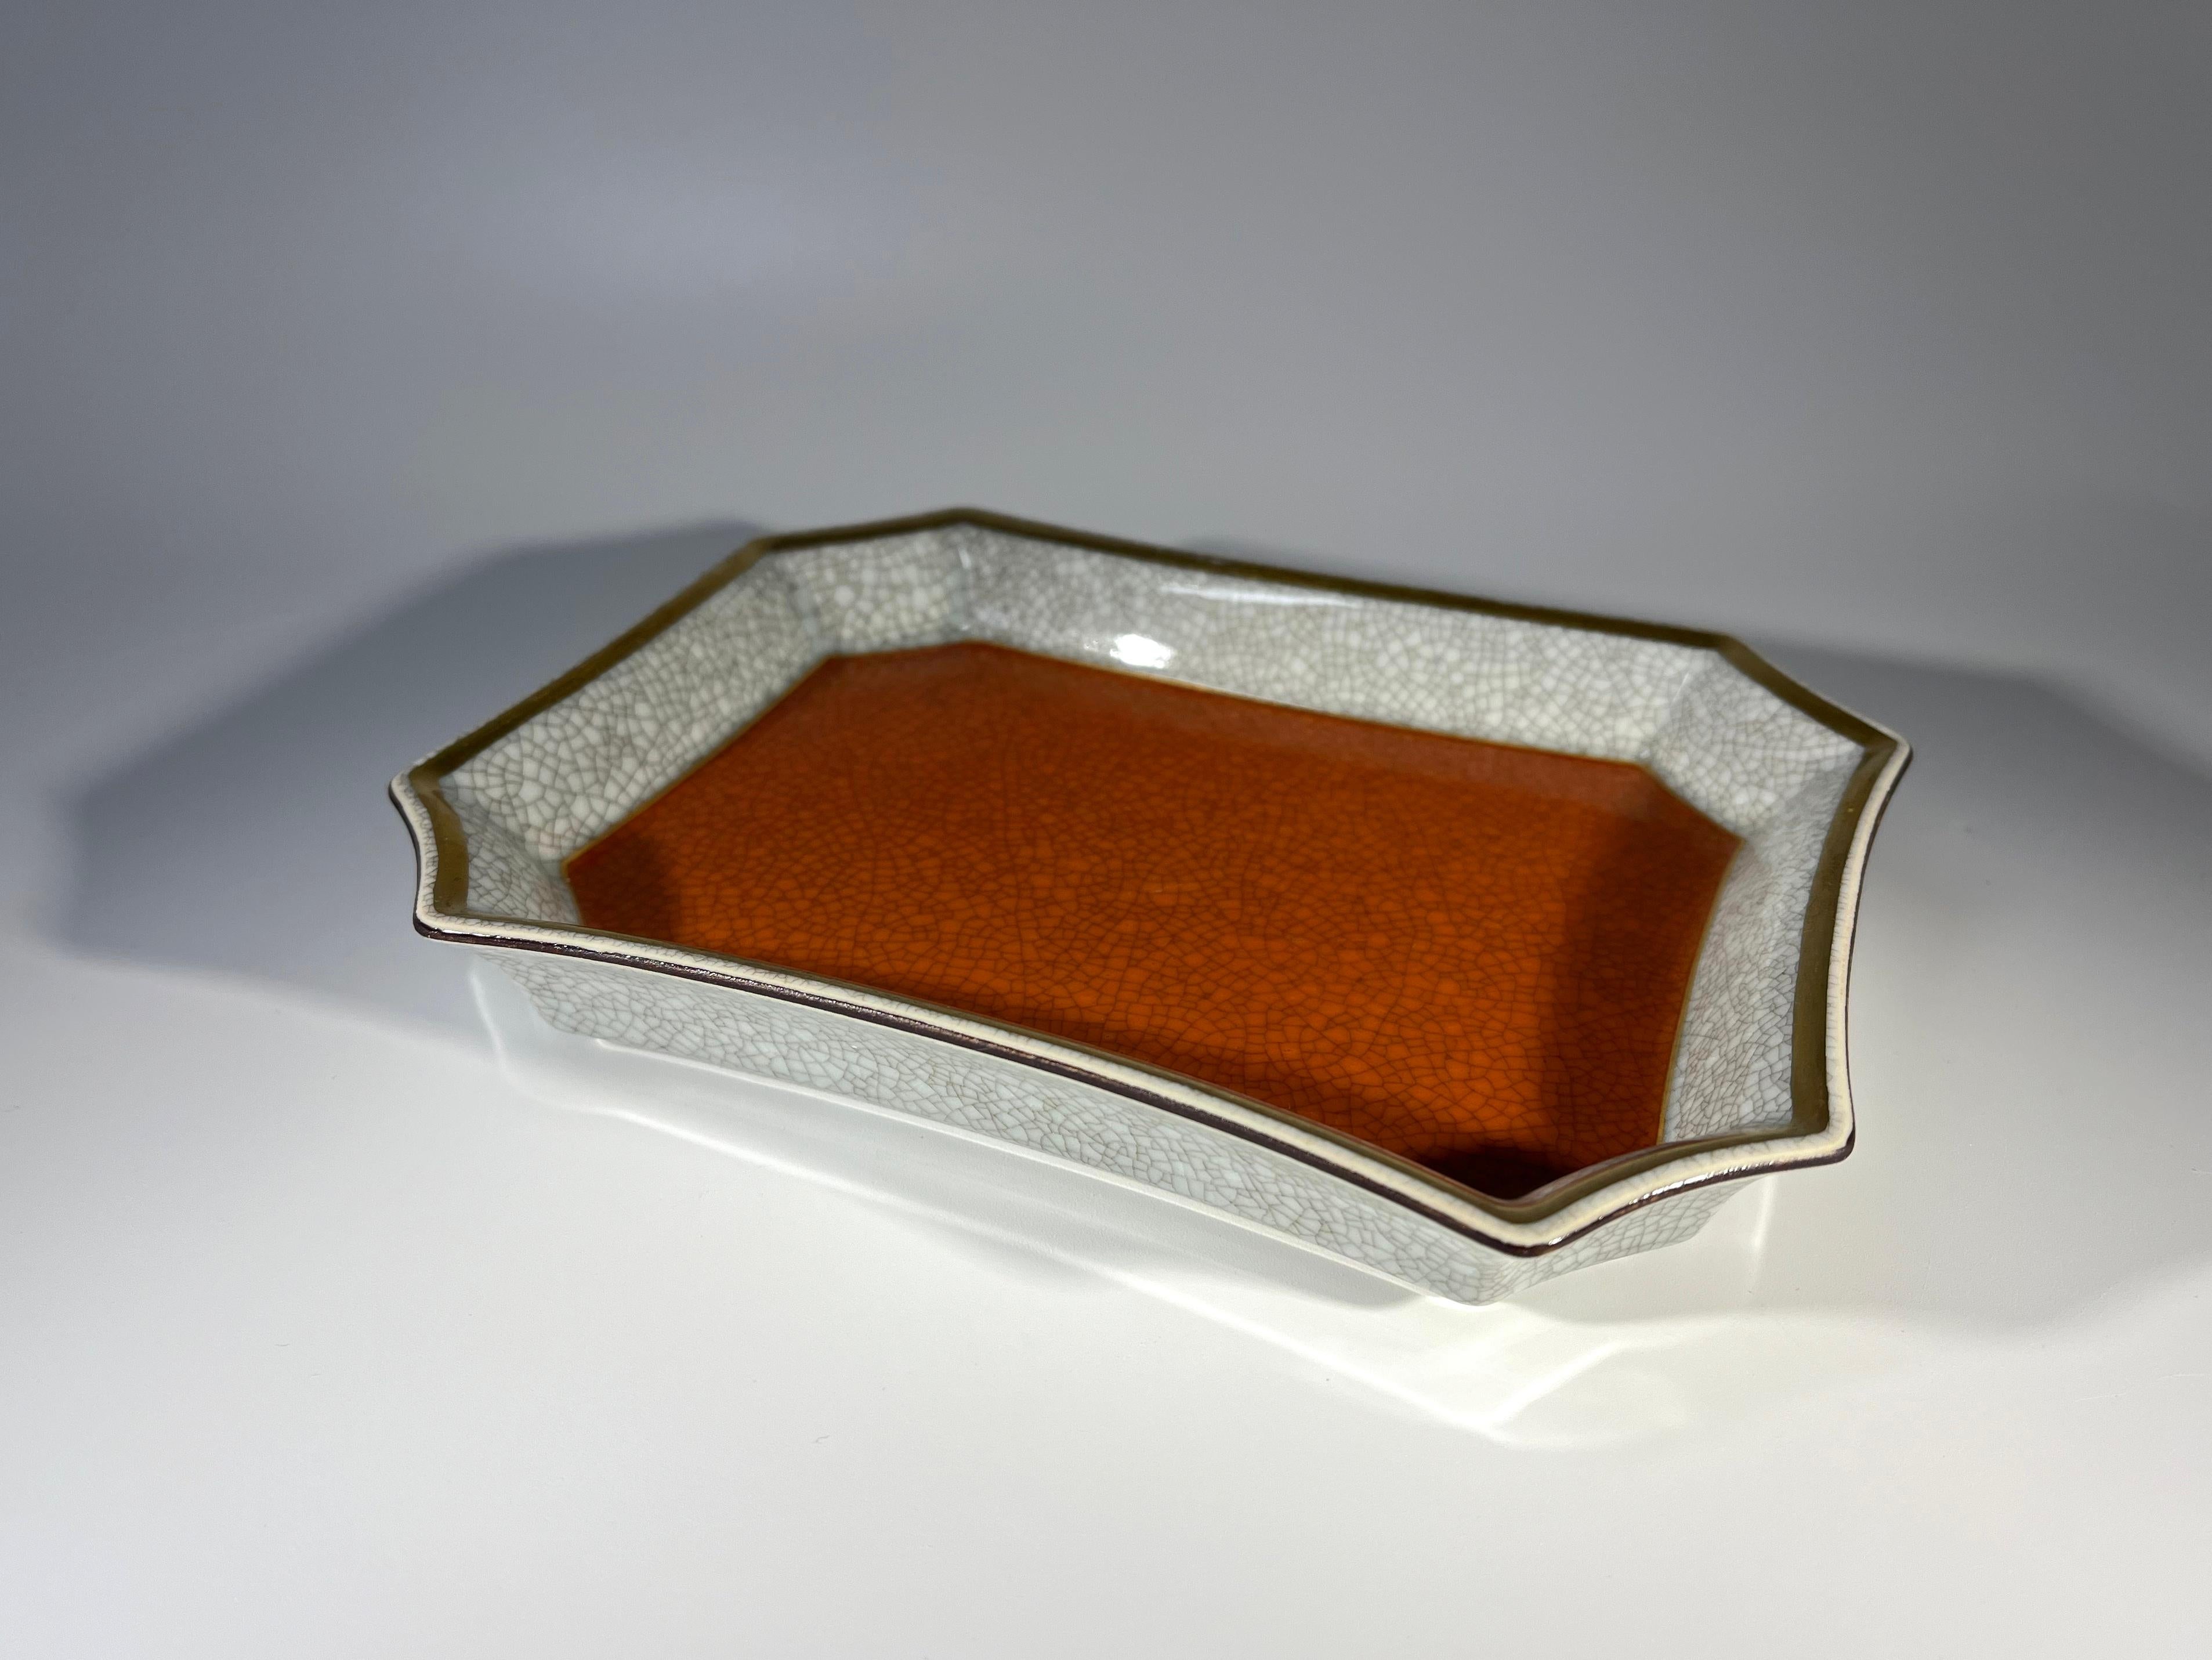 Thorkild Olsen for Royal Copenhagen, terracotta and grey crackle glazed porcelain vide poche. 
Edged with gilded banding - an elegant and useful little tray
Signed and numbered 3391. 
Dated 1968
Height 1 inch, Width 6.5 inch, Depth 5.25 inch
In good